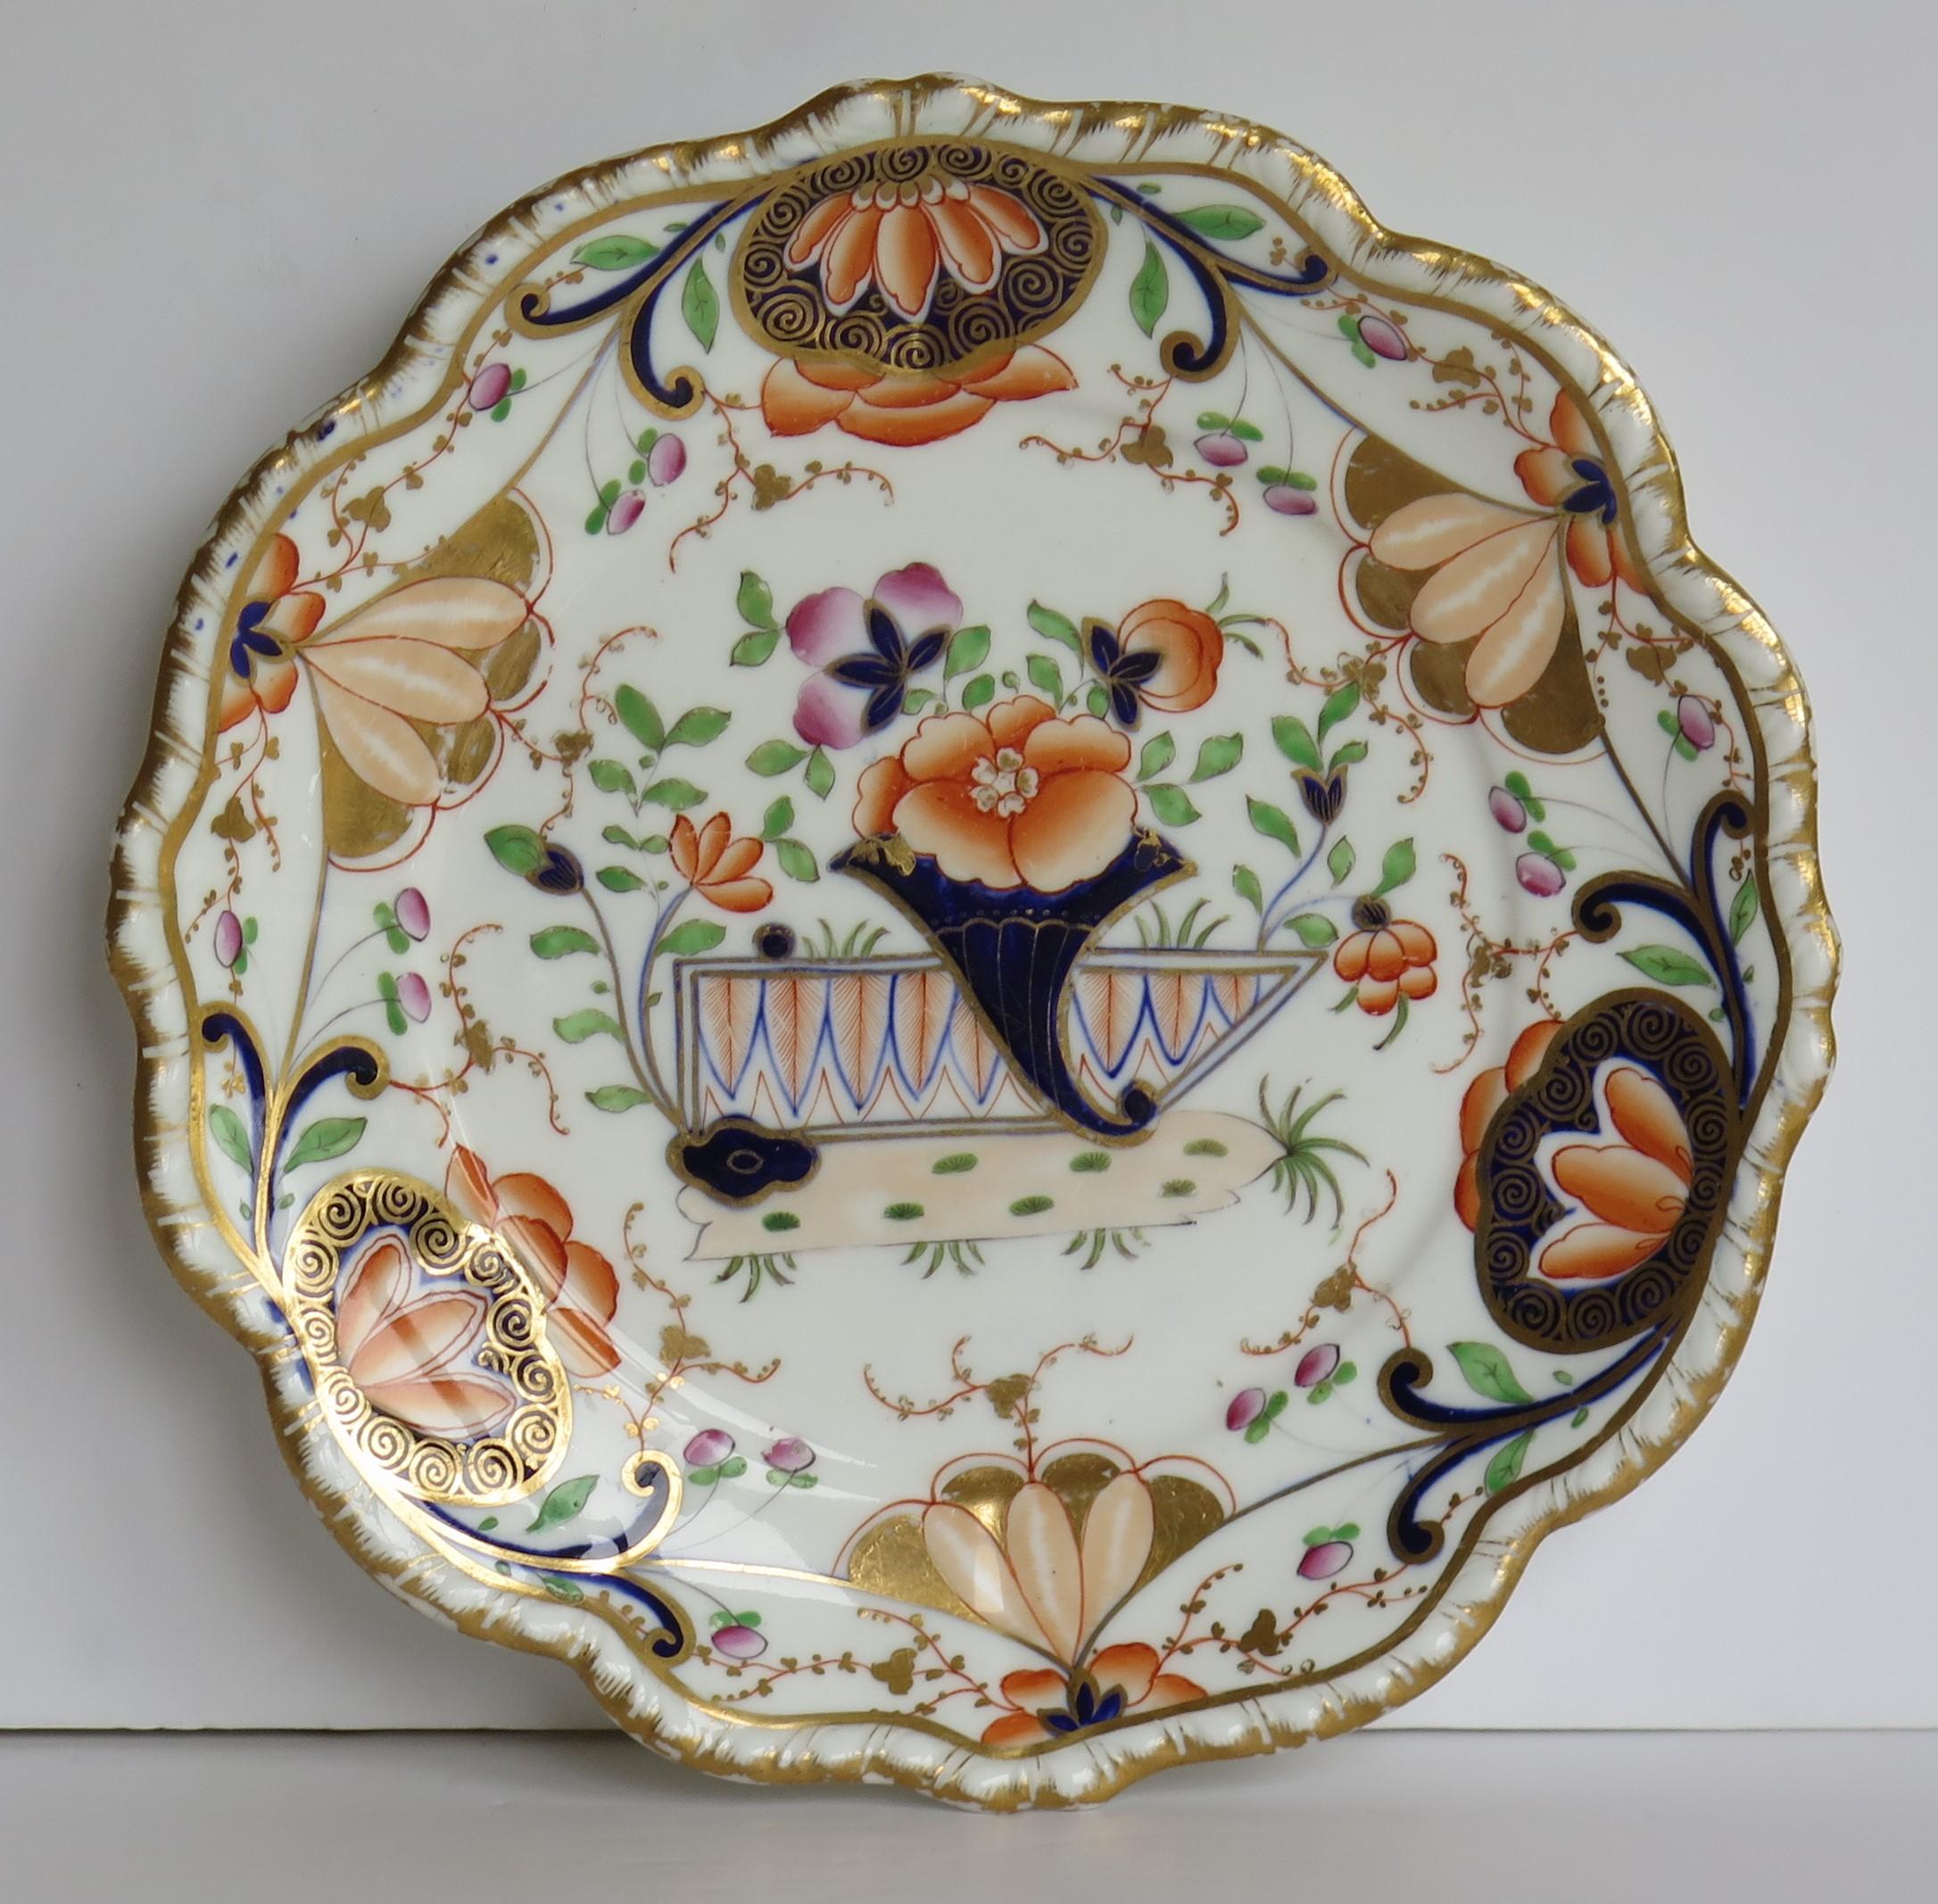 This is an early 19th century porcelain desert dish with a molded wavy edge to the rim, made by one of the quality Staffordshire, English potteries and dating from the George 111rd period, circa 1820 to 1830.

This piece is unmarked to the base